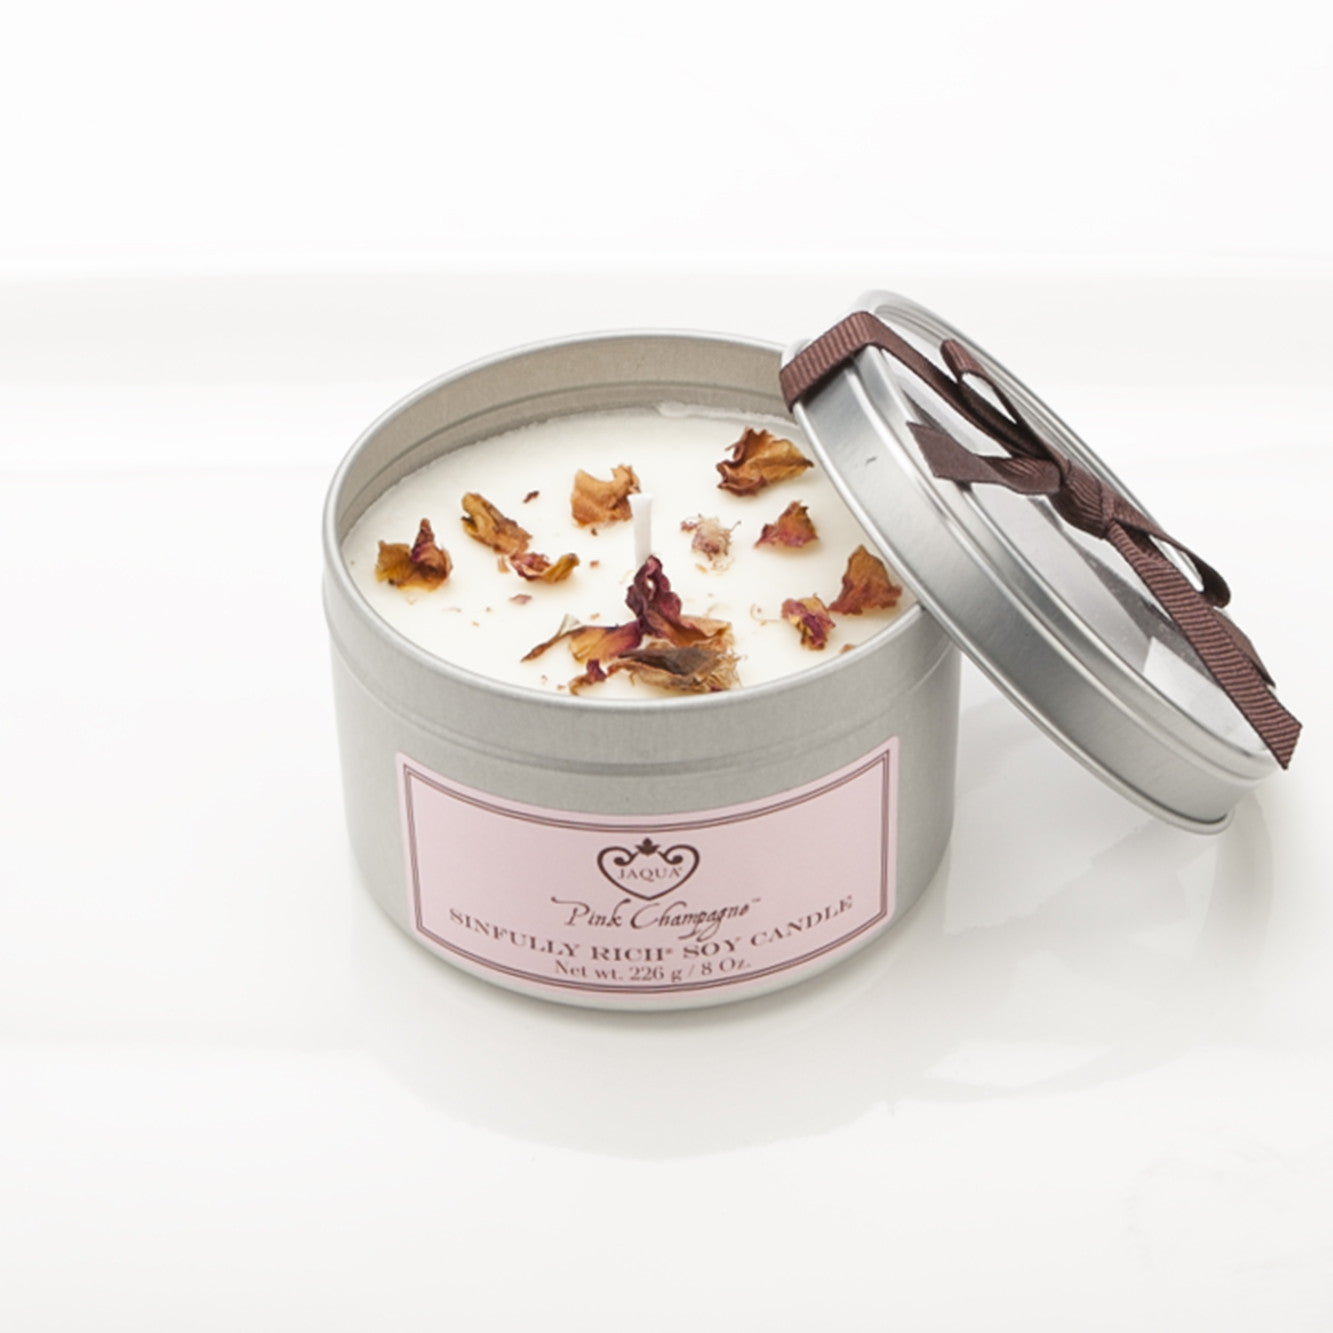 Pink Champagne Natural Soy Candle